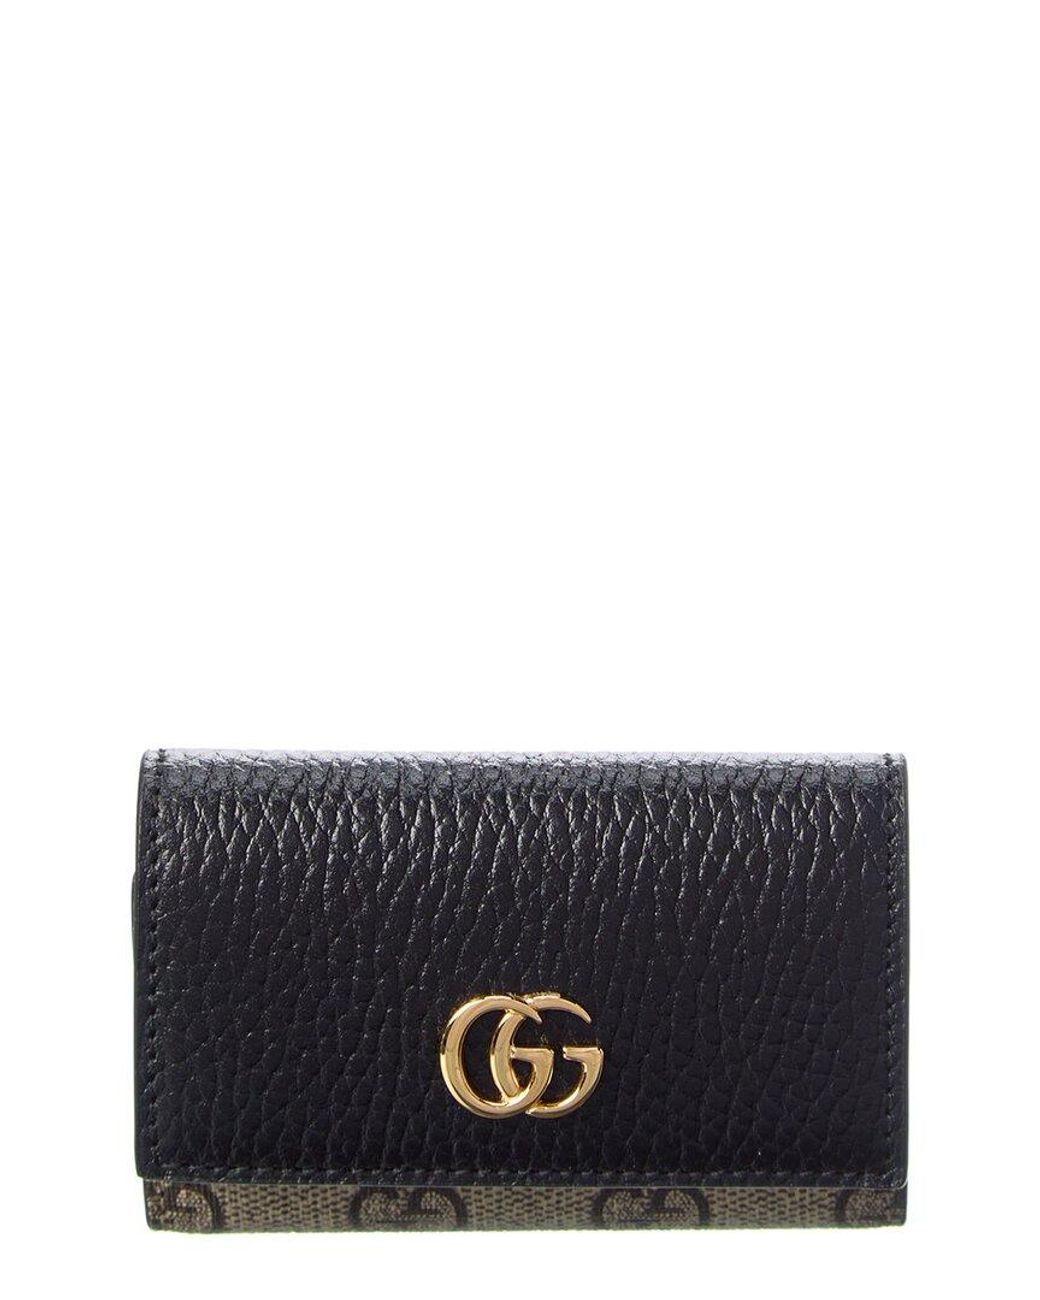 Gucci Black Key Holder Leather Trifold Wallet